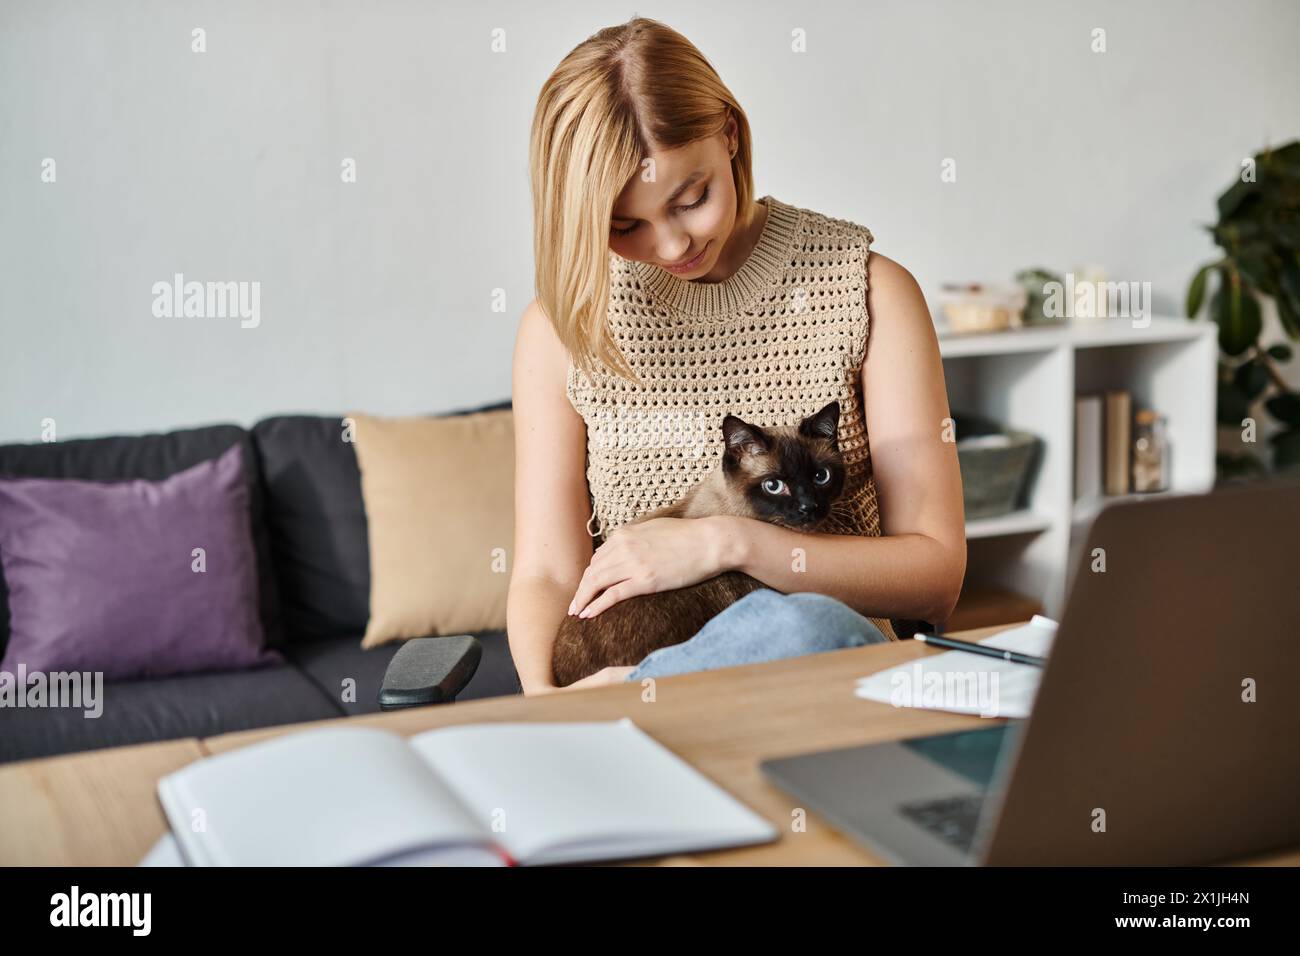 A contented woman with short hair sits at a table with her cat in her lap, enjoying a peaceful moment at home. Stock Photo